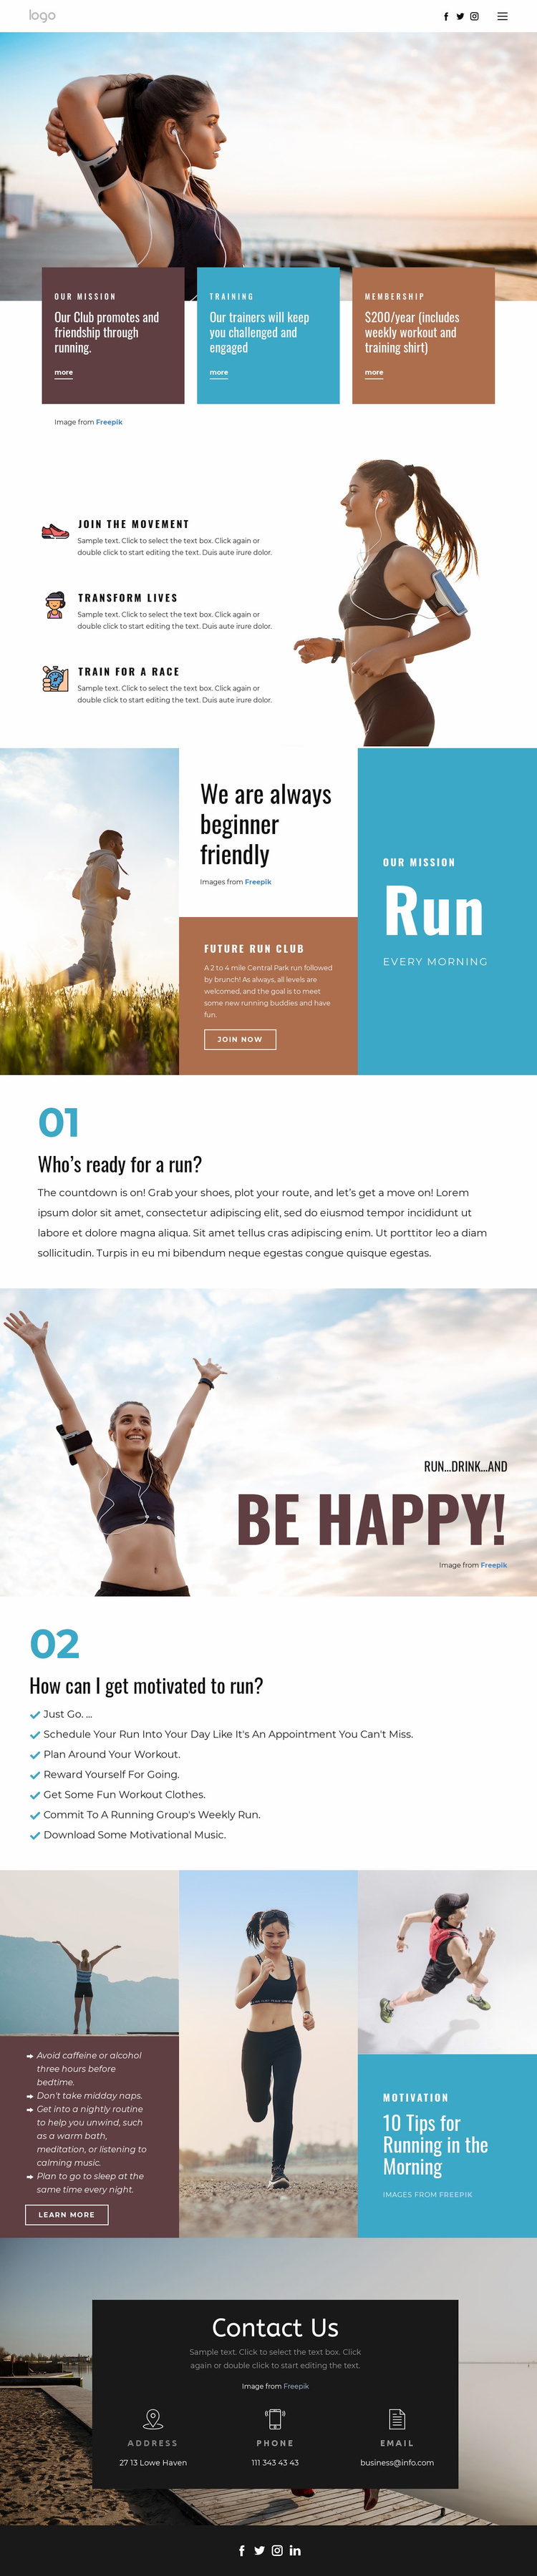 Running club for sports Wix Template Alternative